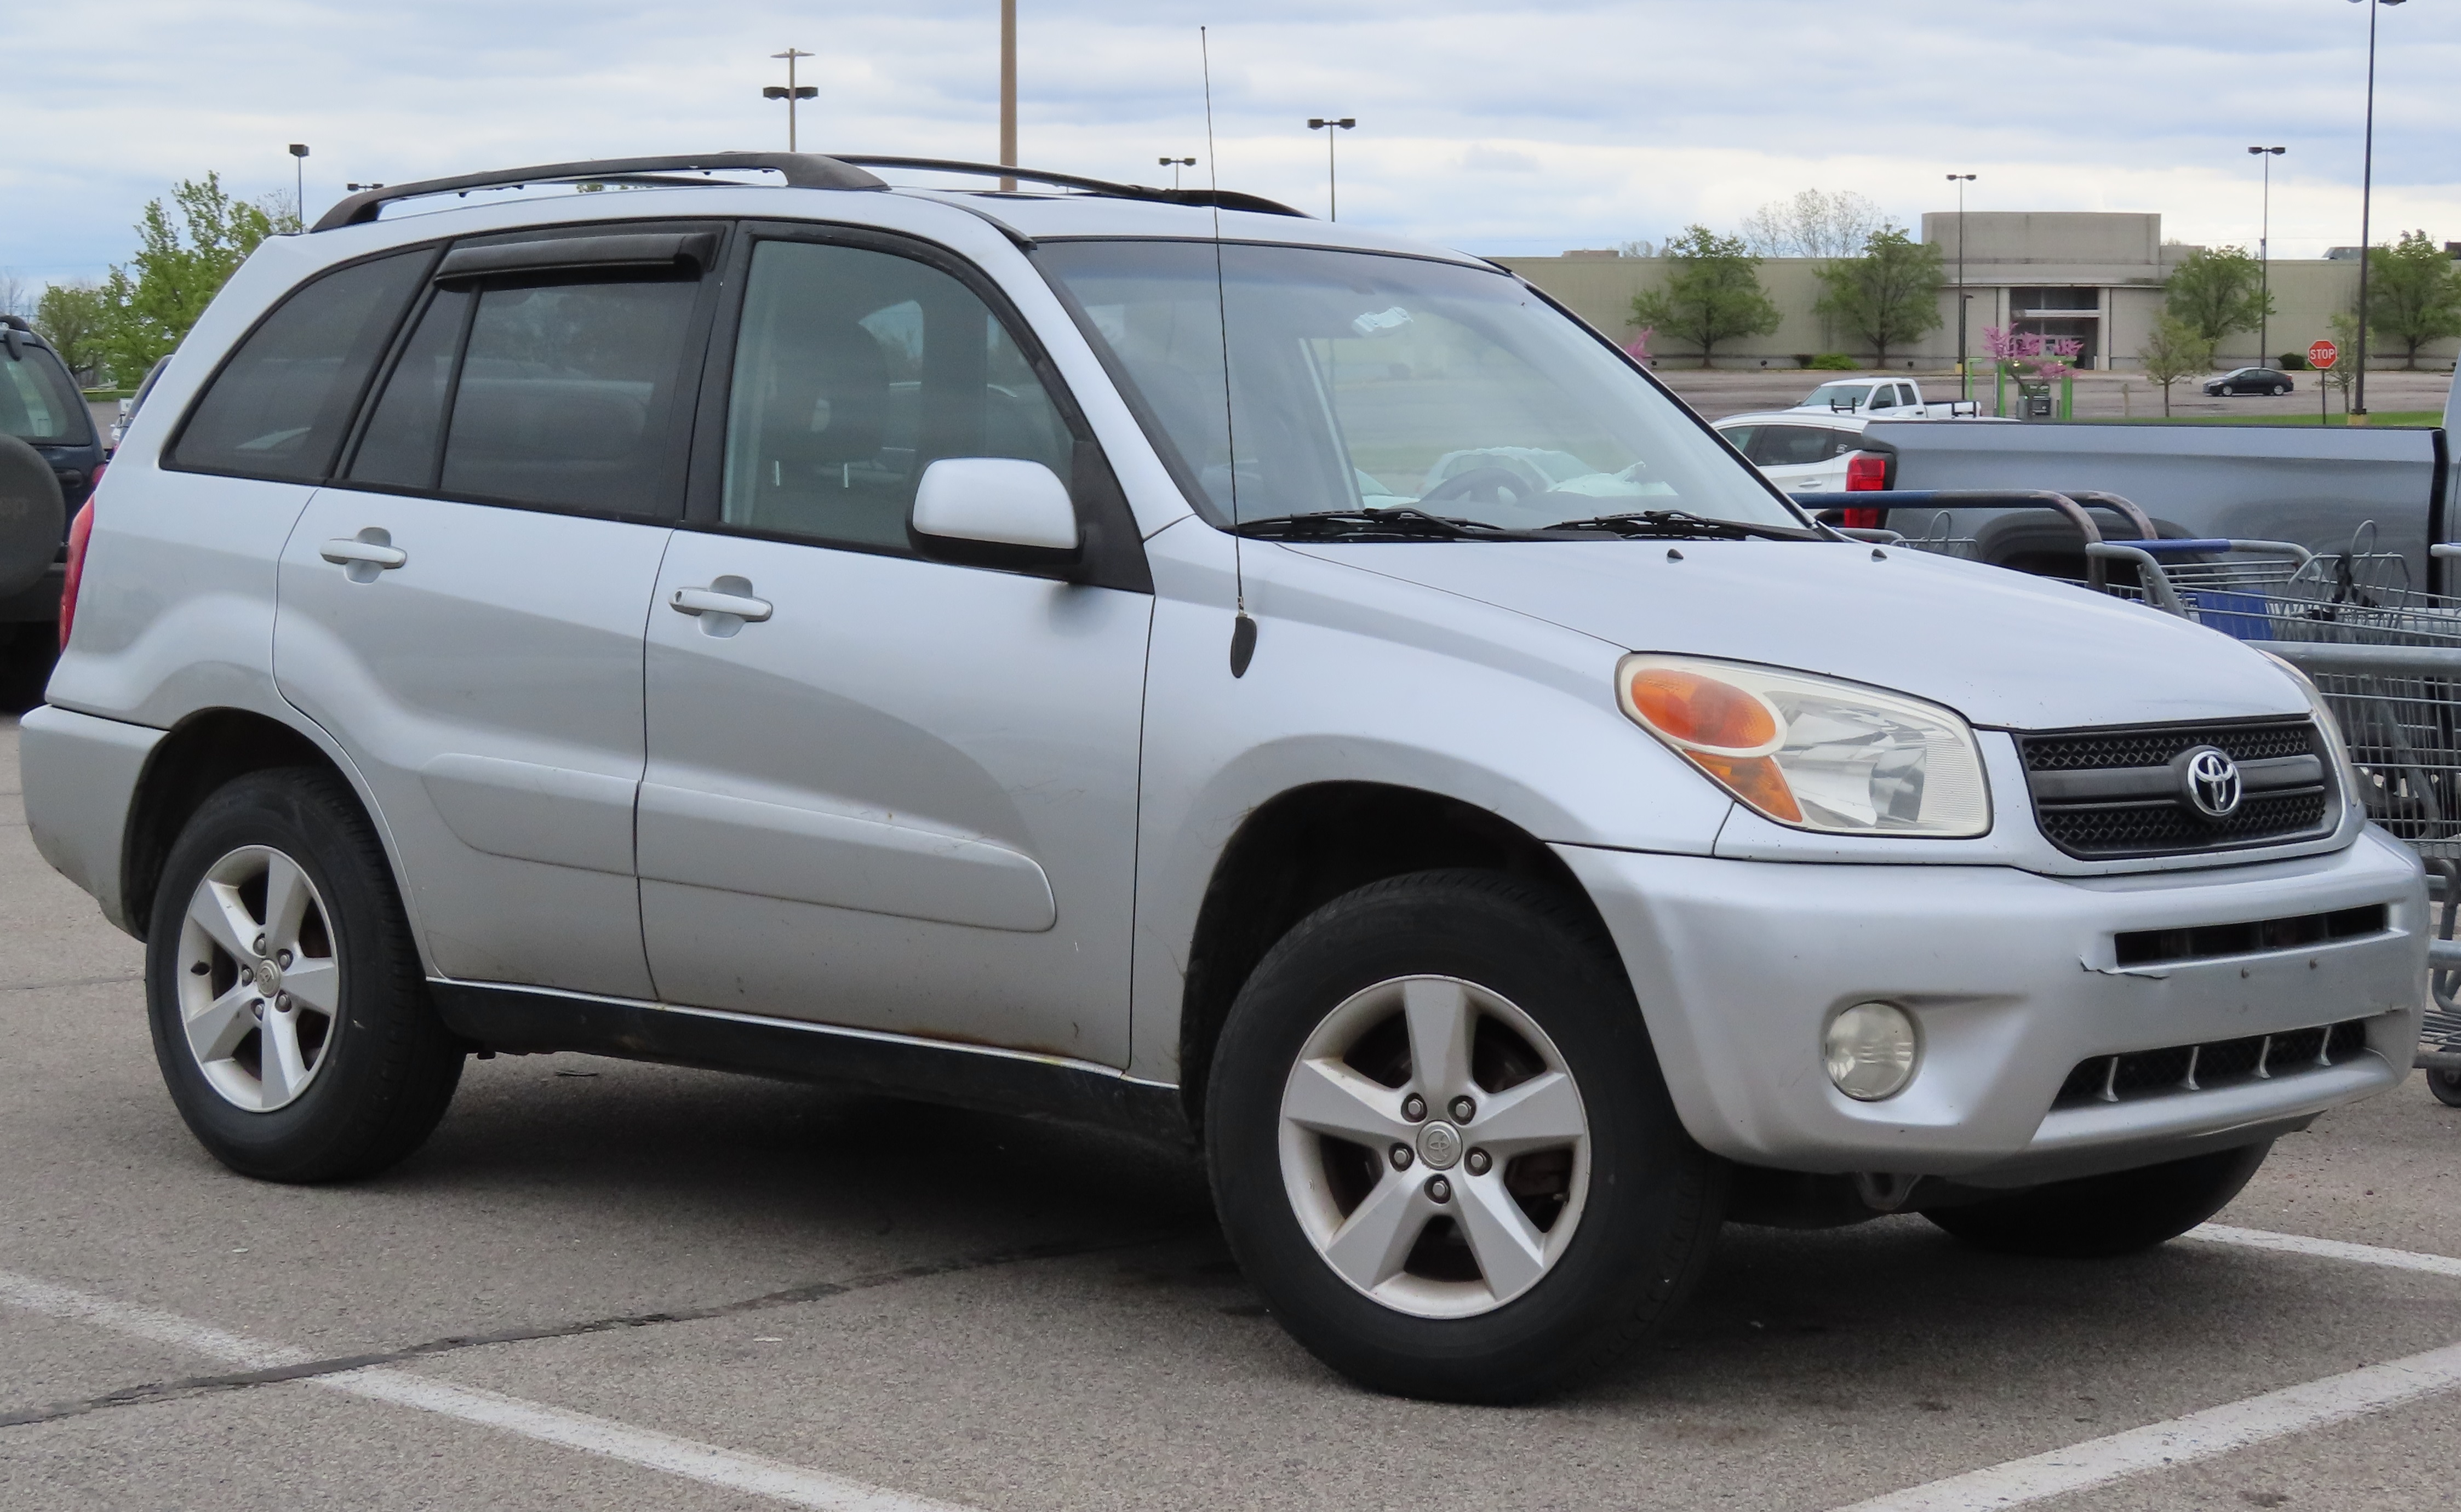 File:2004-2005 Toyota RAV4 4WD with L Package.jpg - Wikimedia Commons